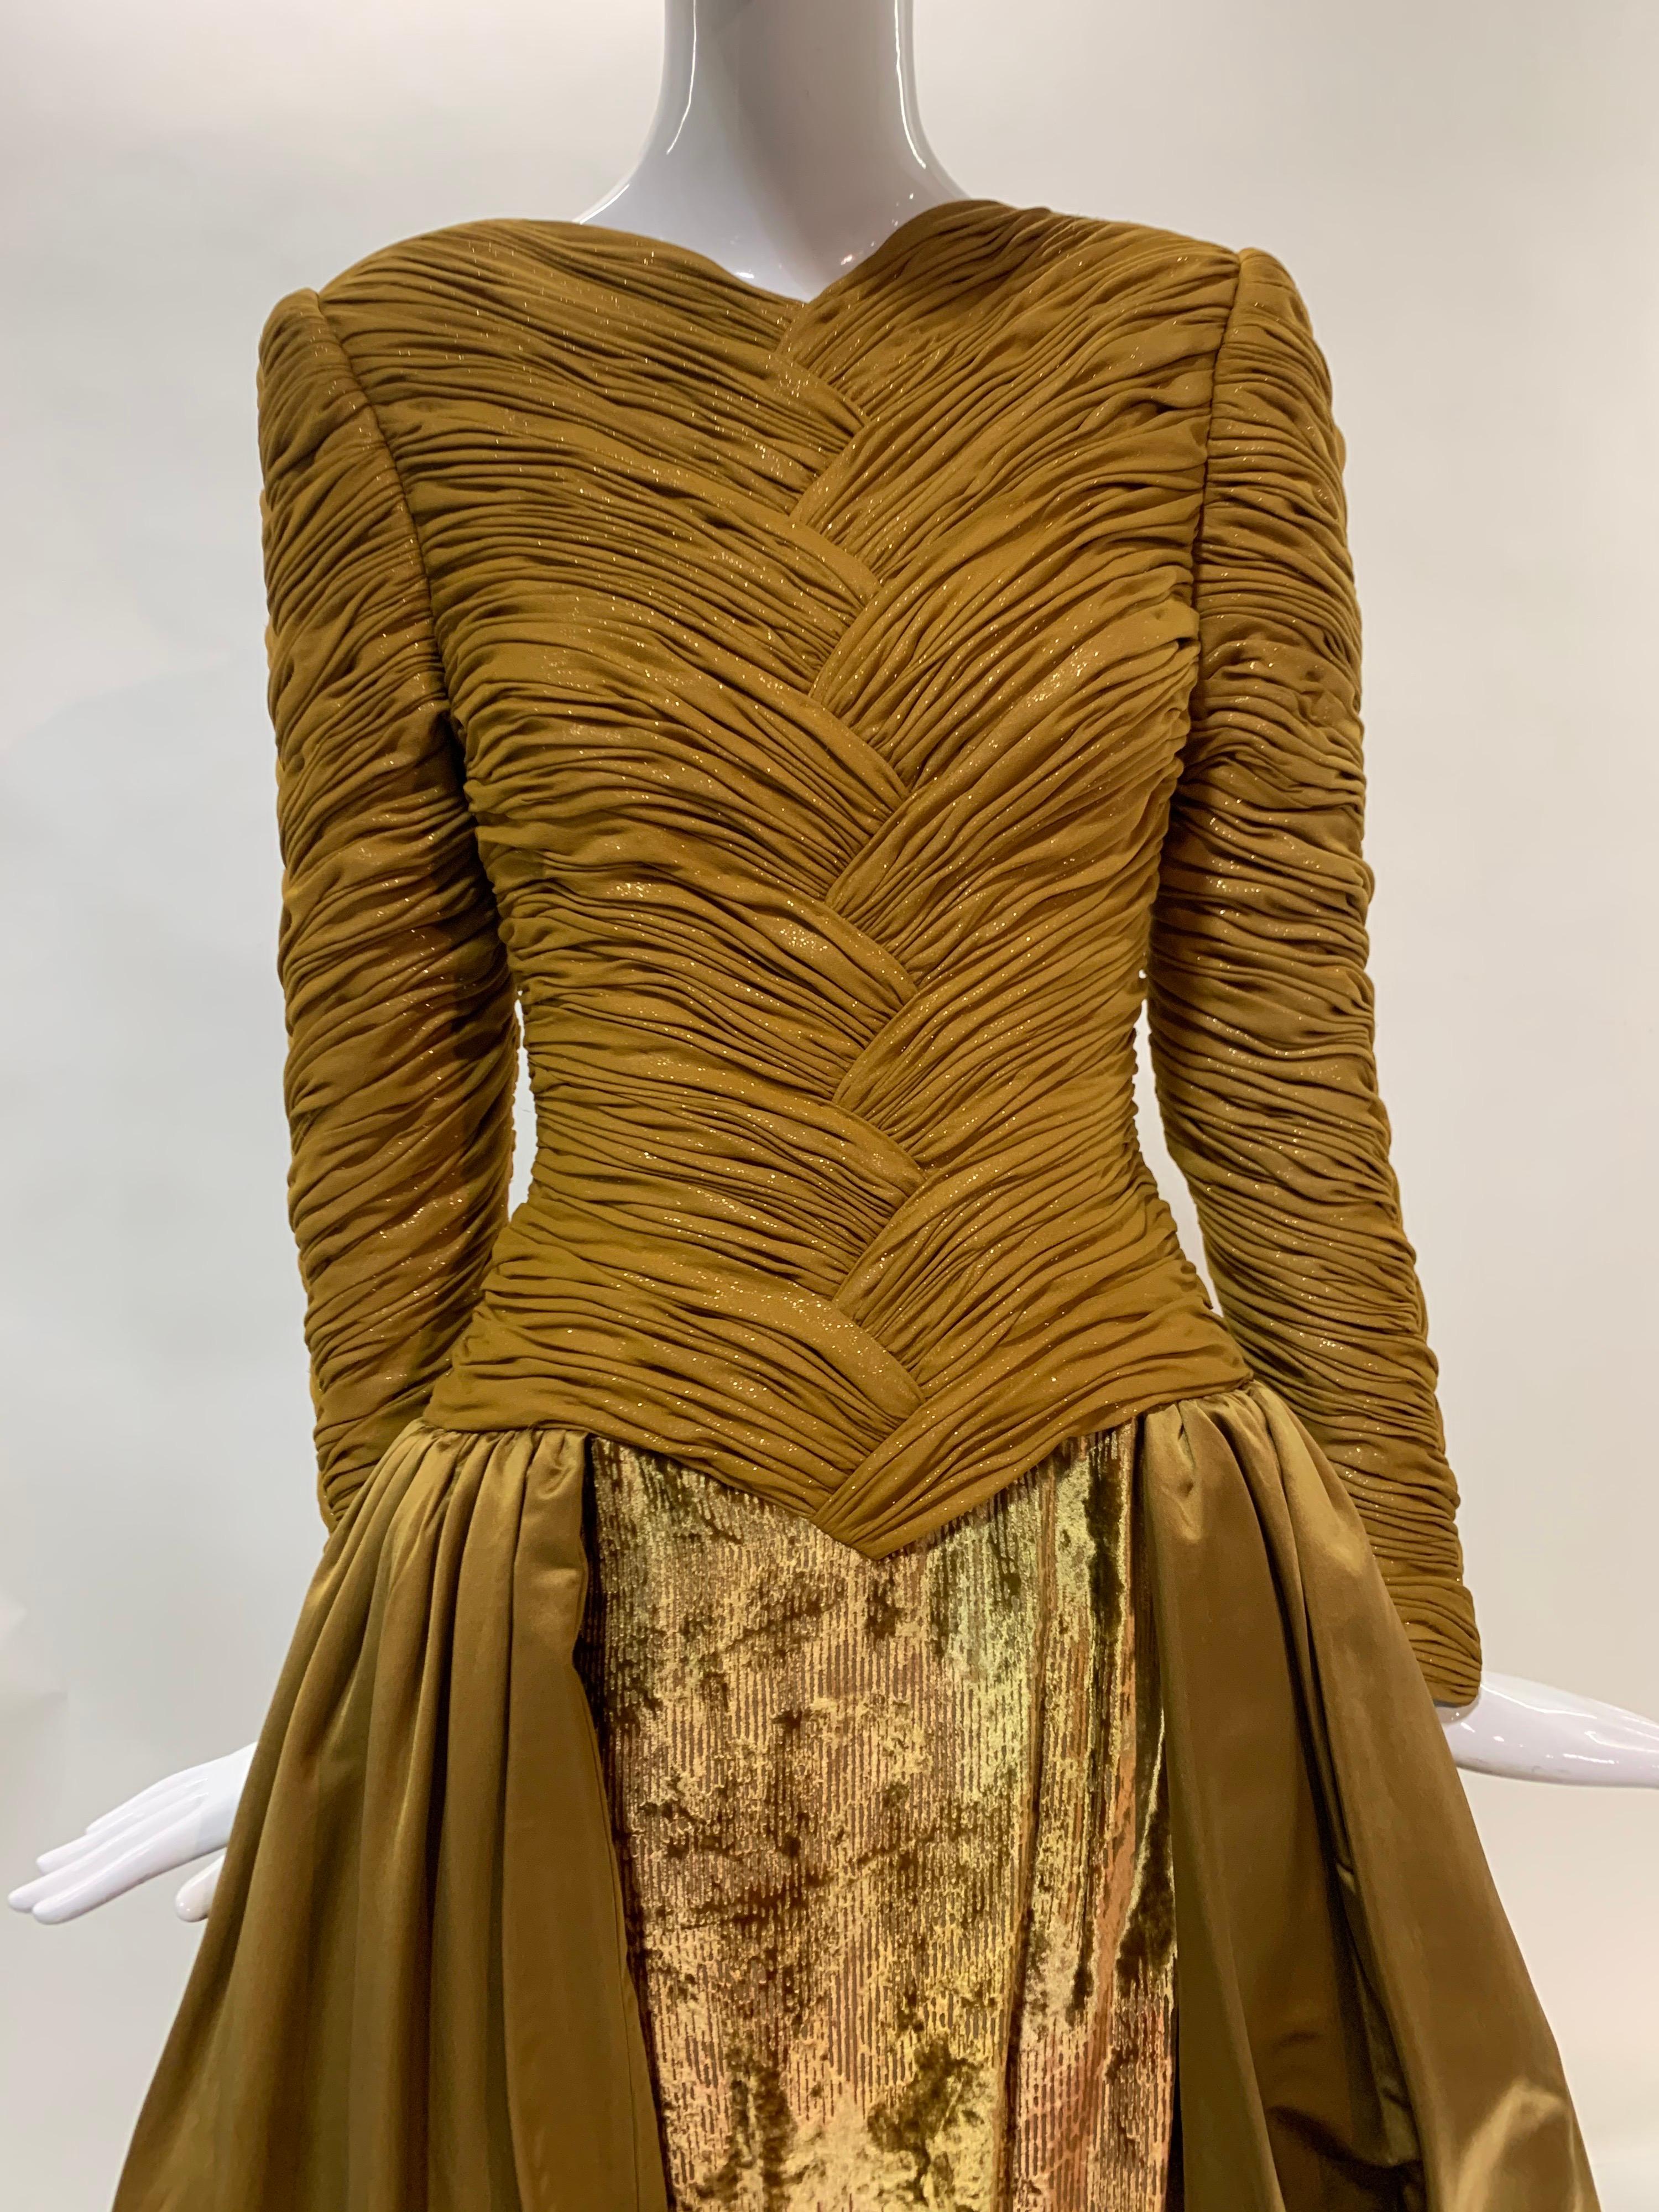 1990s Demi-Couture Gold Silk Ball Gown w/ Velvet Sheath & Dramatic Satin Skirt  For Sale 7